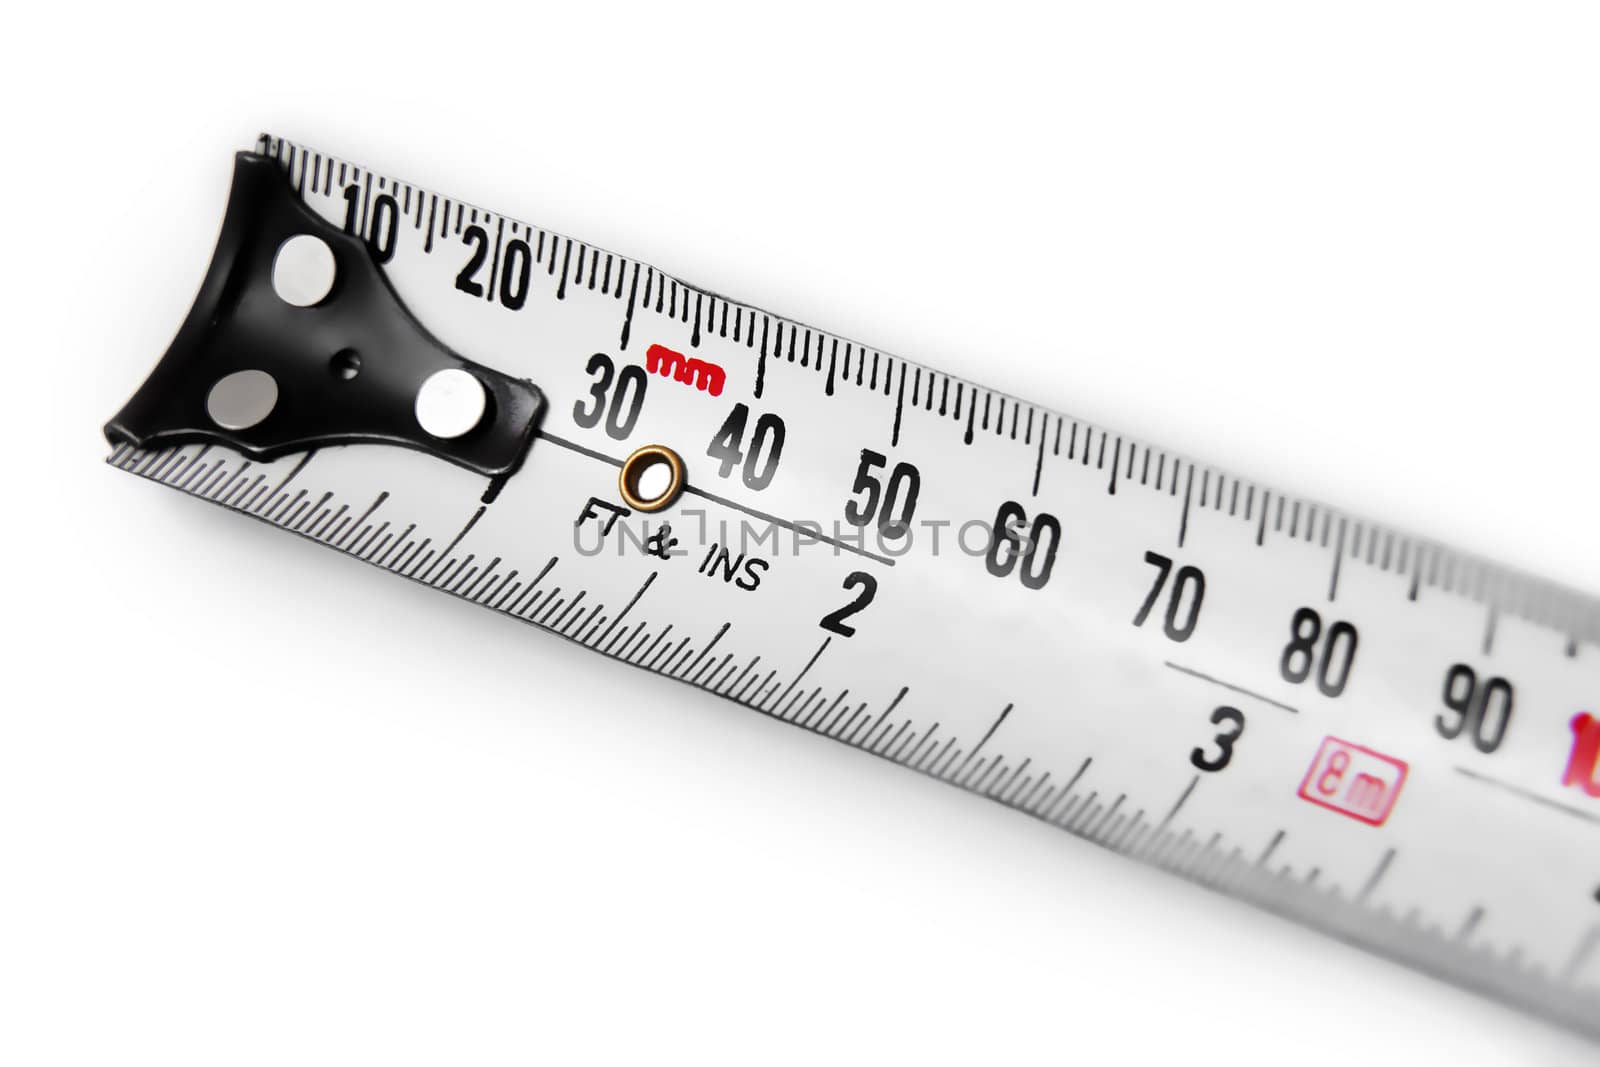 Macro of a handyperson's tape measure